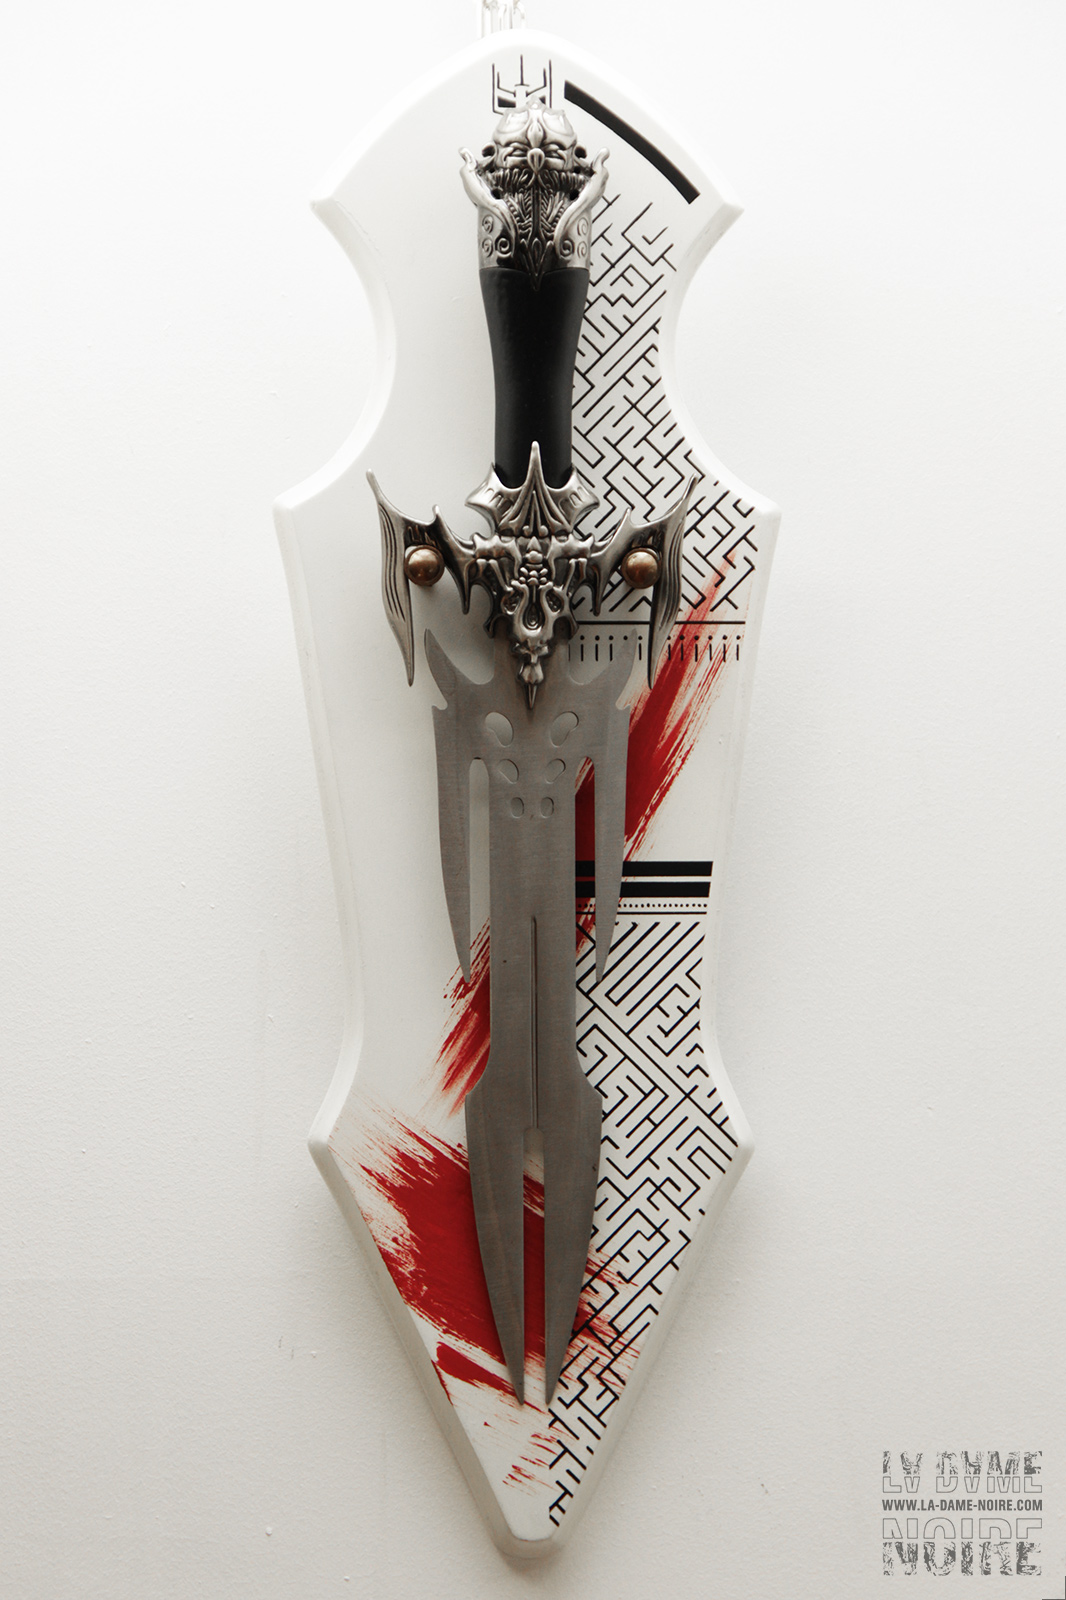 Global wiew of a fantasy viking sword painted in white and red